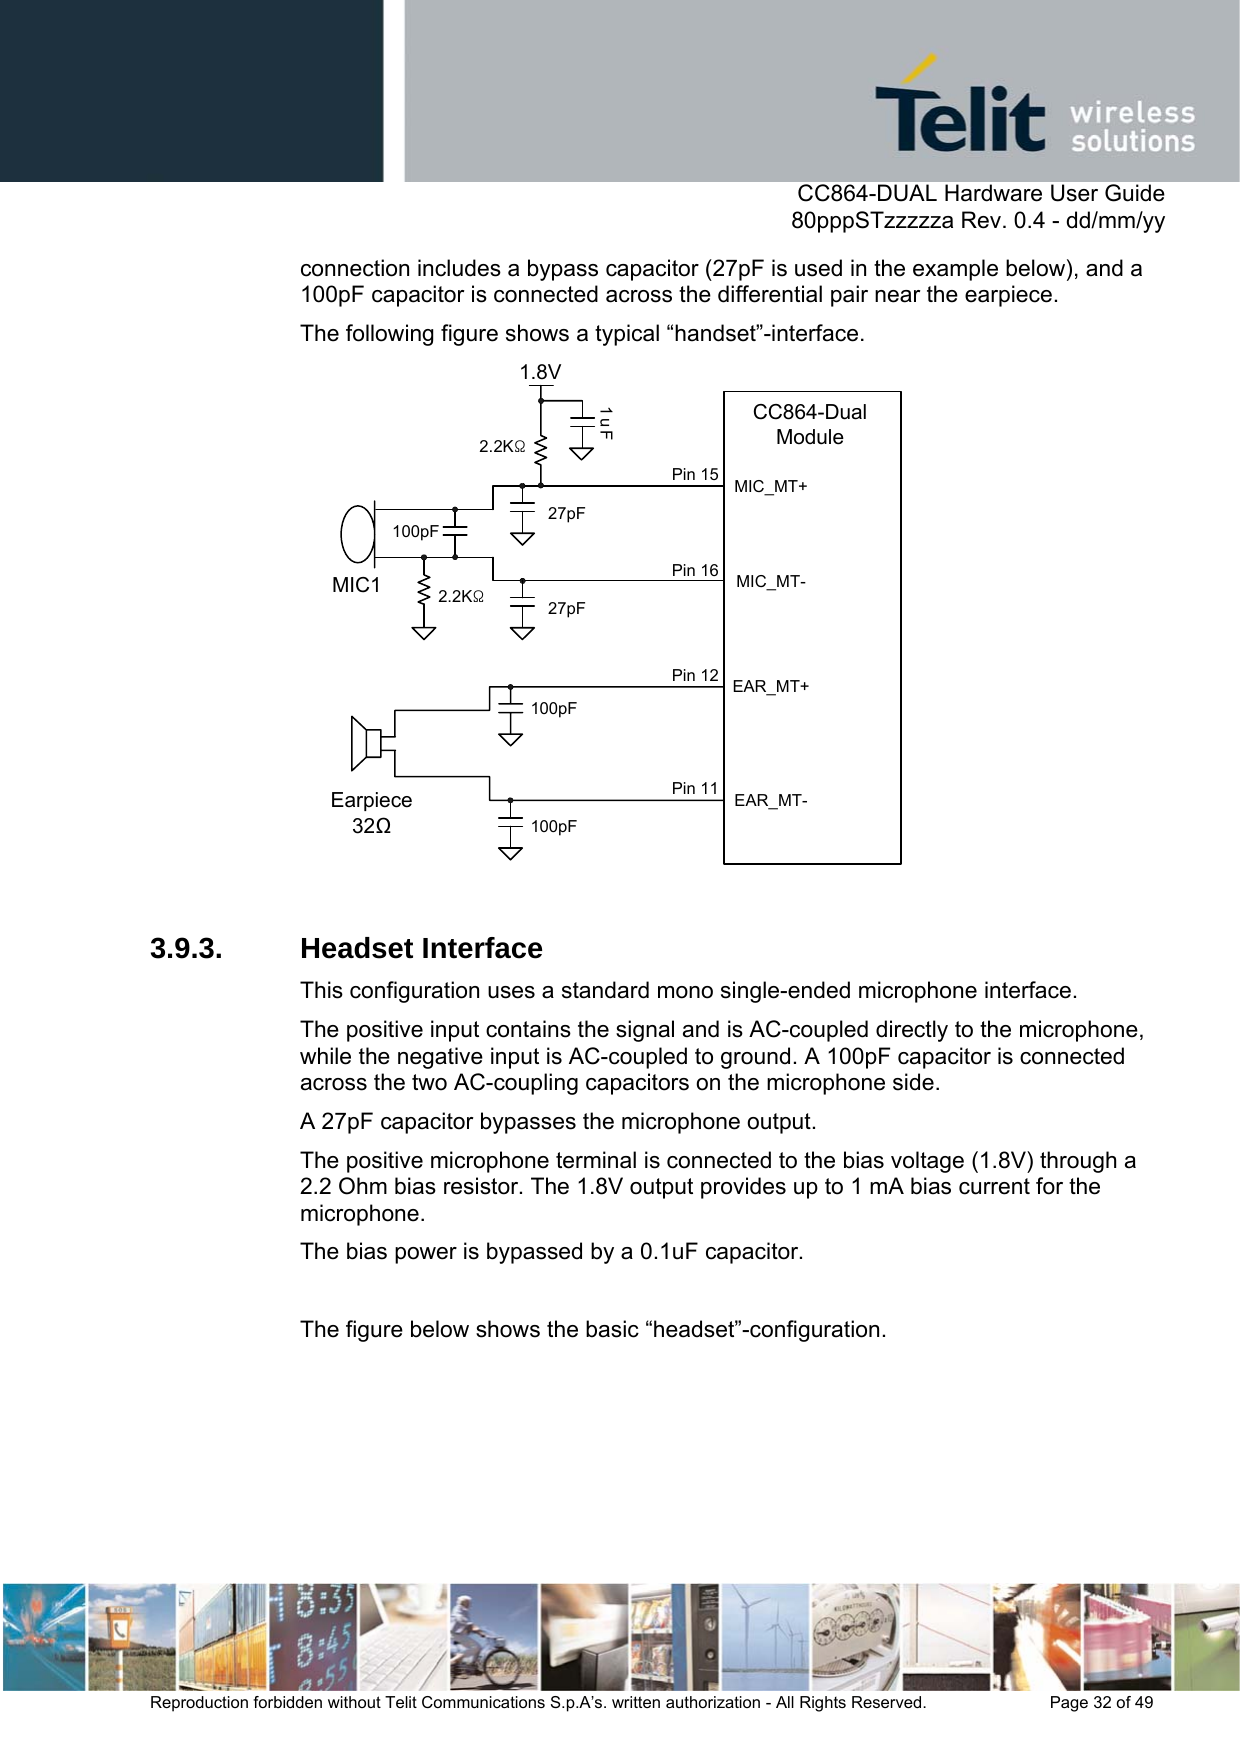      CC864-DUAL Hardware User Guide   80pppSTzzzzza Rev. 0.4 - dd/mm/yy   Reproduction forbidden without Telit Communications S.p.A’s. written authorization - All Rights Reserved.    Page 32 of 49  connection includes a bypass capacitor (27pF is used in the example below), and a 100pF capacitor is connected across the differential pair near the earpiece. The following figure shows a typical “handset”-interface. MIC_MT-1.8V1uFEarpiece32100pF100pF100pFMIC127pF27pF2.2KΩ2.2KΩMIC_MT+EAR_MT-EAR_MT+CC864-Dual ModulePin 15Pin 16Pin 12Pin 11  3.9.3. Headset Interface This configuration uses a standard mono single-ended microphone interface.  The positive input contains the signal and is AC-coupled directly to the microphone, while the negative input is AC-coupled to ground. A 100pF capacitor is connected across the two AC-coupling capacitors on the microphone side.  A 27pF capacitor bypasses the microphone output. The positive microphone terminal is connected to the bias voltage (1.8V) through a 2.2 Ohm bias resistor. The 1.8V output provides up to 1 mA bias current for the microphone.  The bias power is bypassed by a 0.1uF capacitor.  The figure below shows the basic “headset”-configuration. 